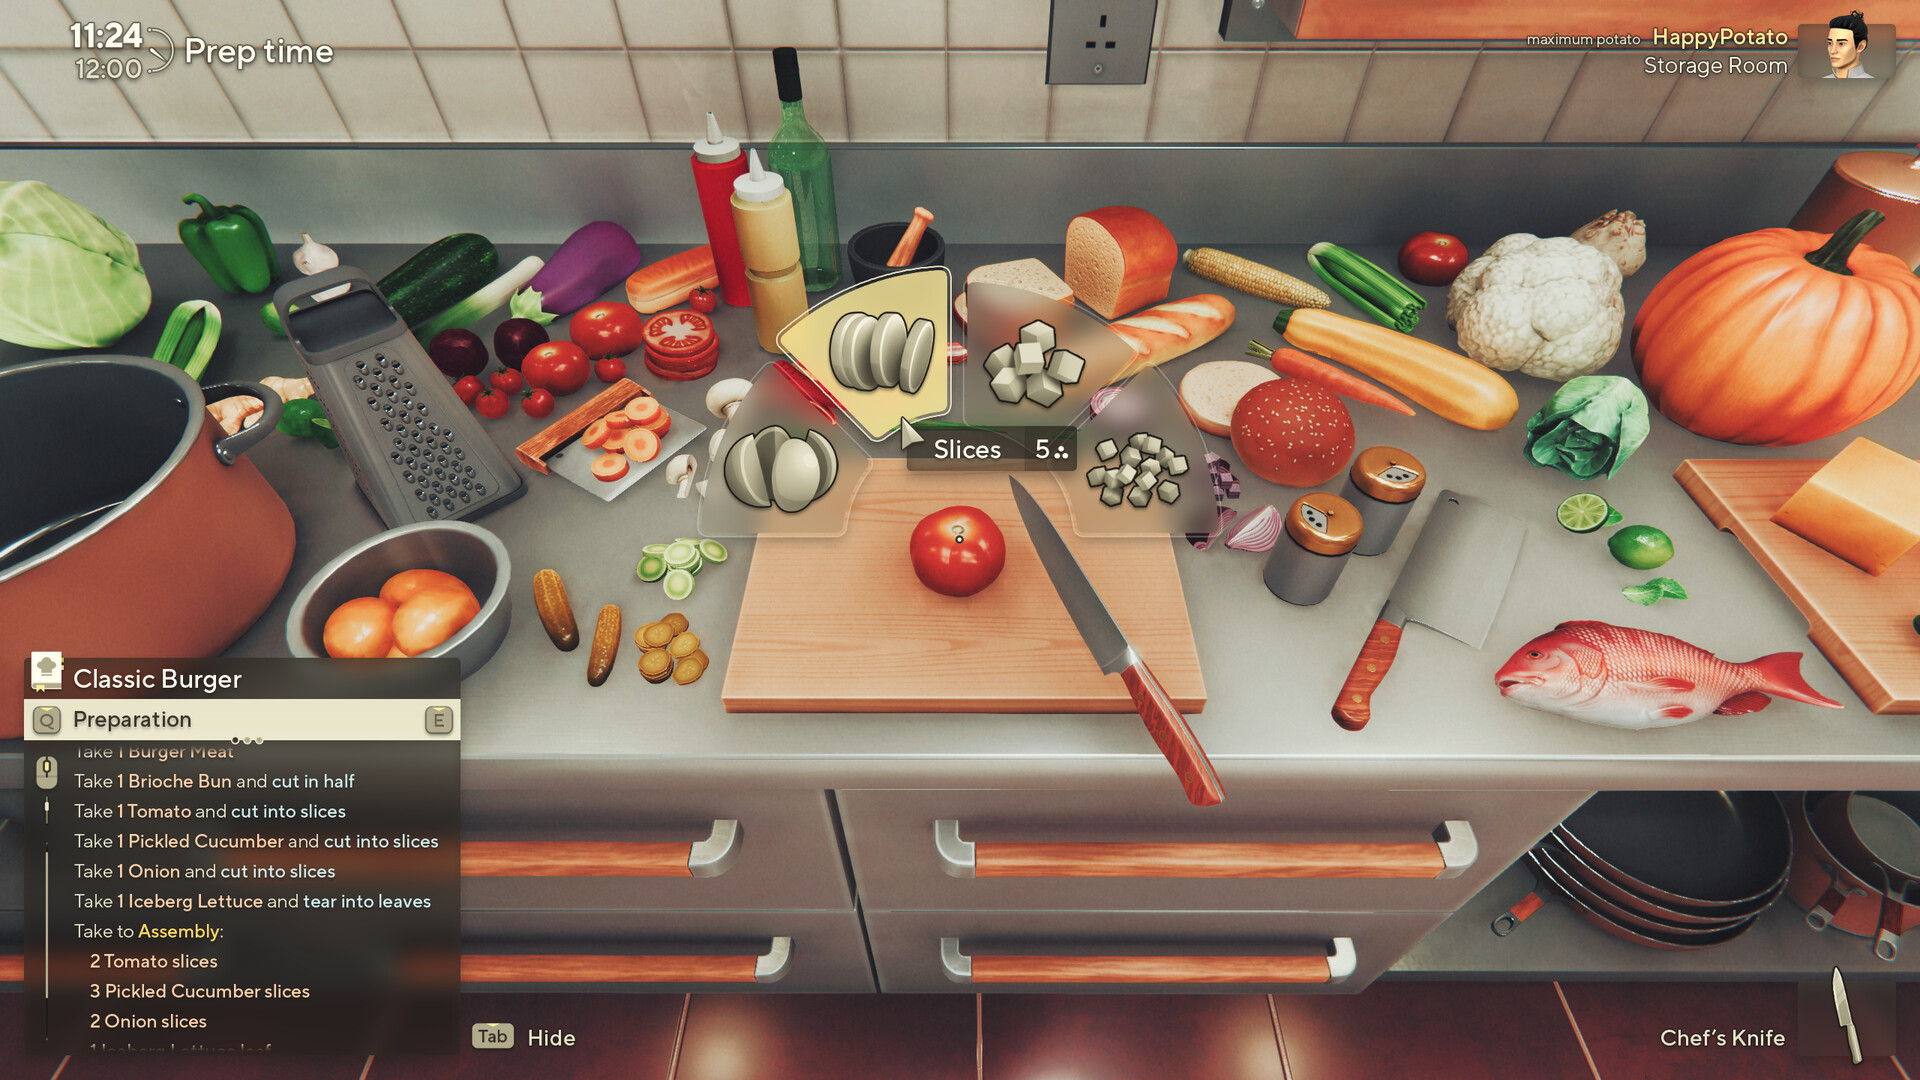 Steam :: Cooking Simulator :: Chaos Tool FREE DLC now available!